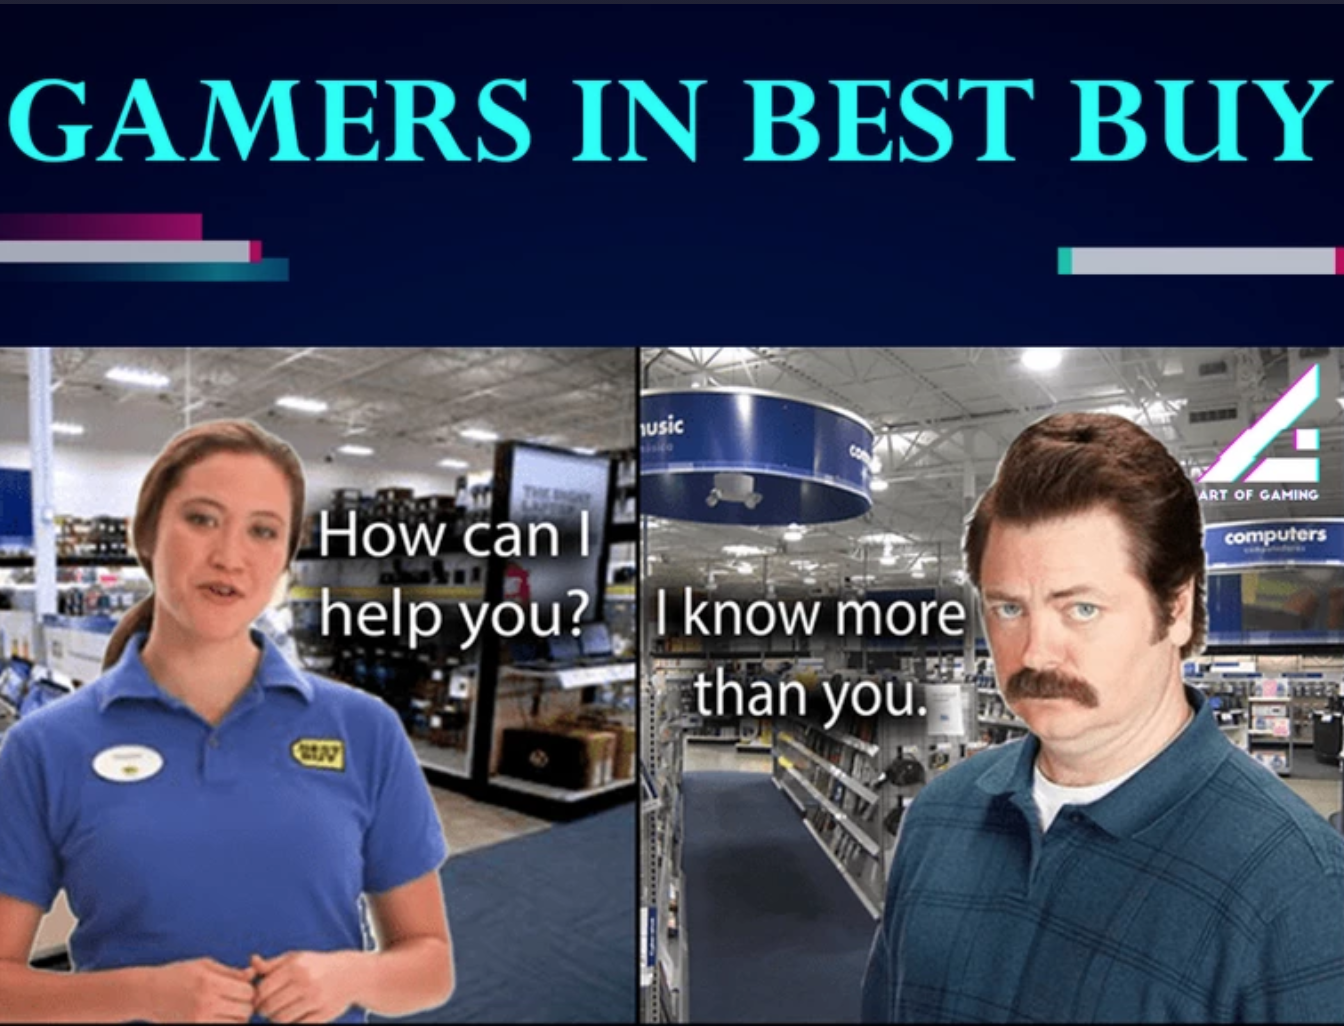 funny gaming memes - communication - Gamers In Best Buy usic Art Of Gaming computers How can help you? I know more than you.